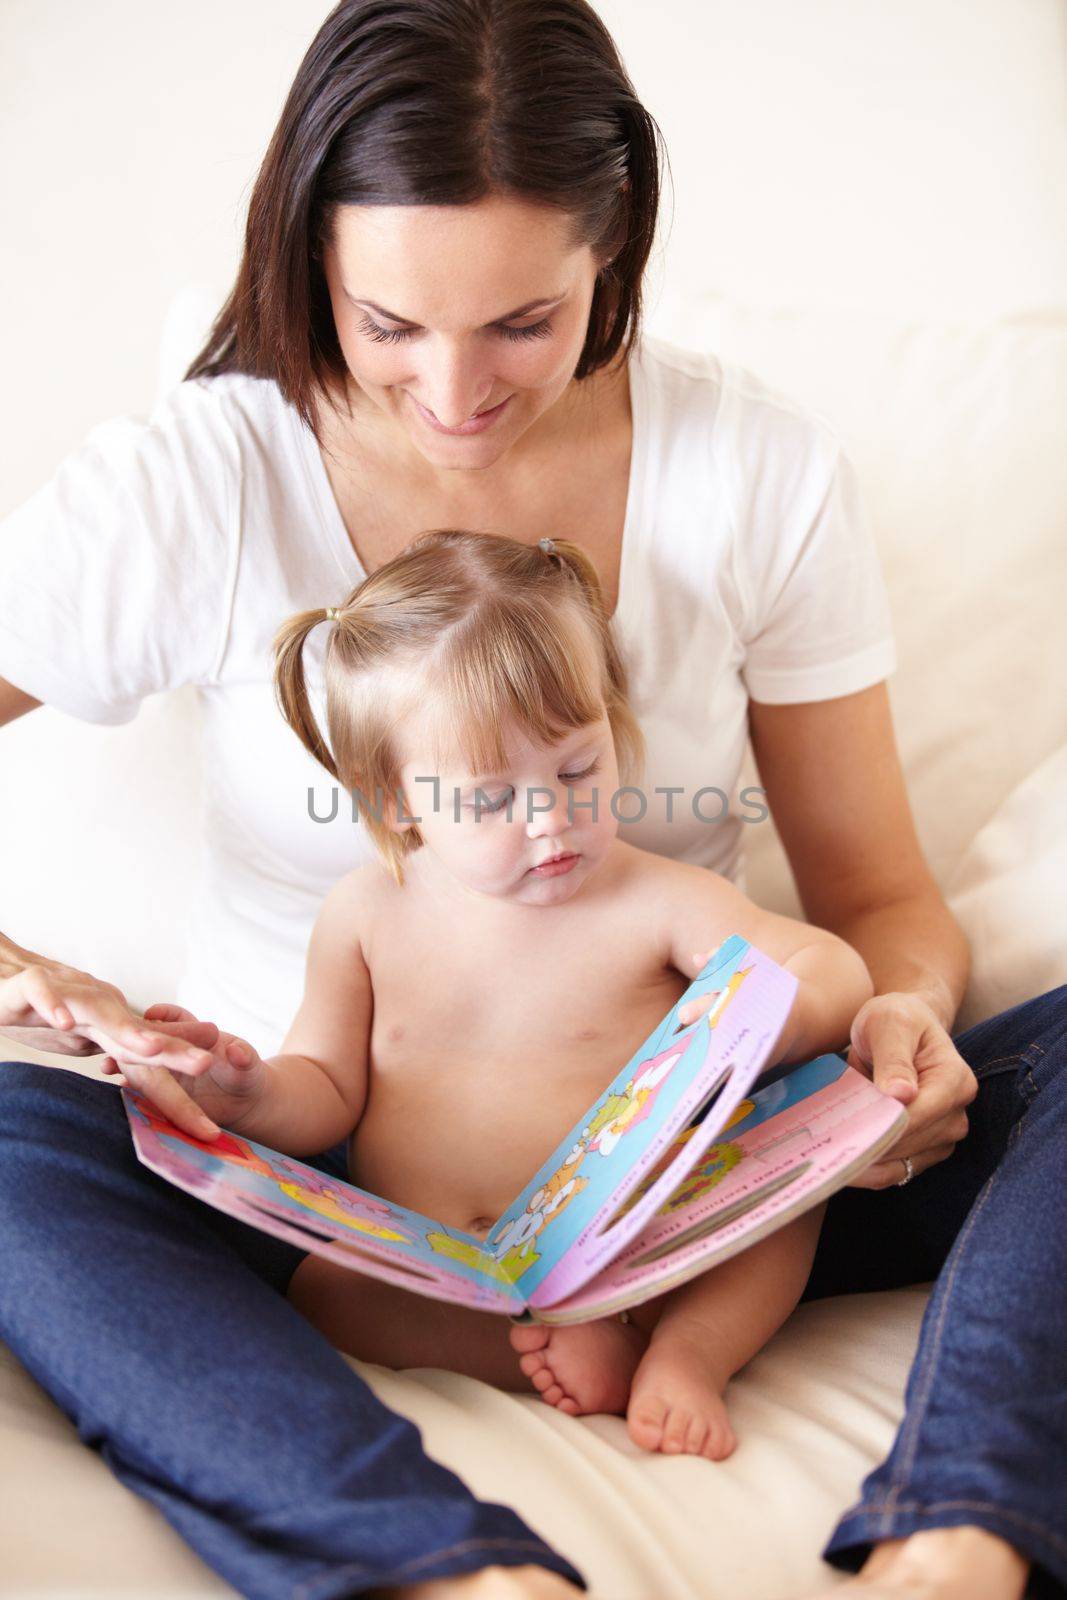 Deciding on a story. A cute little girl reading with her mother